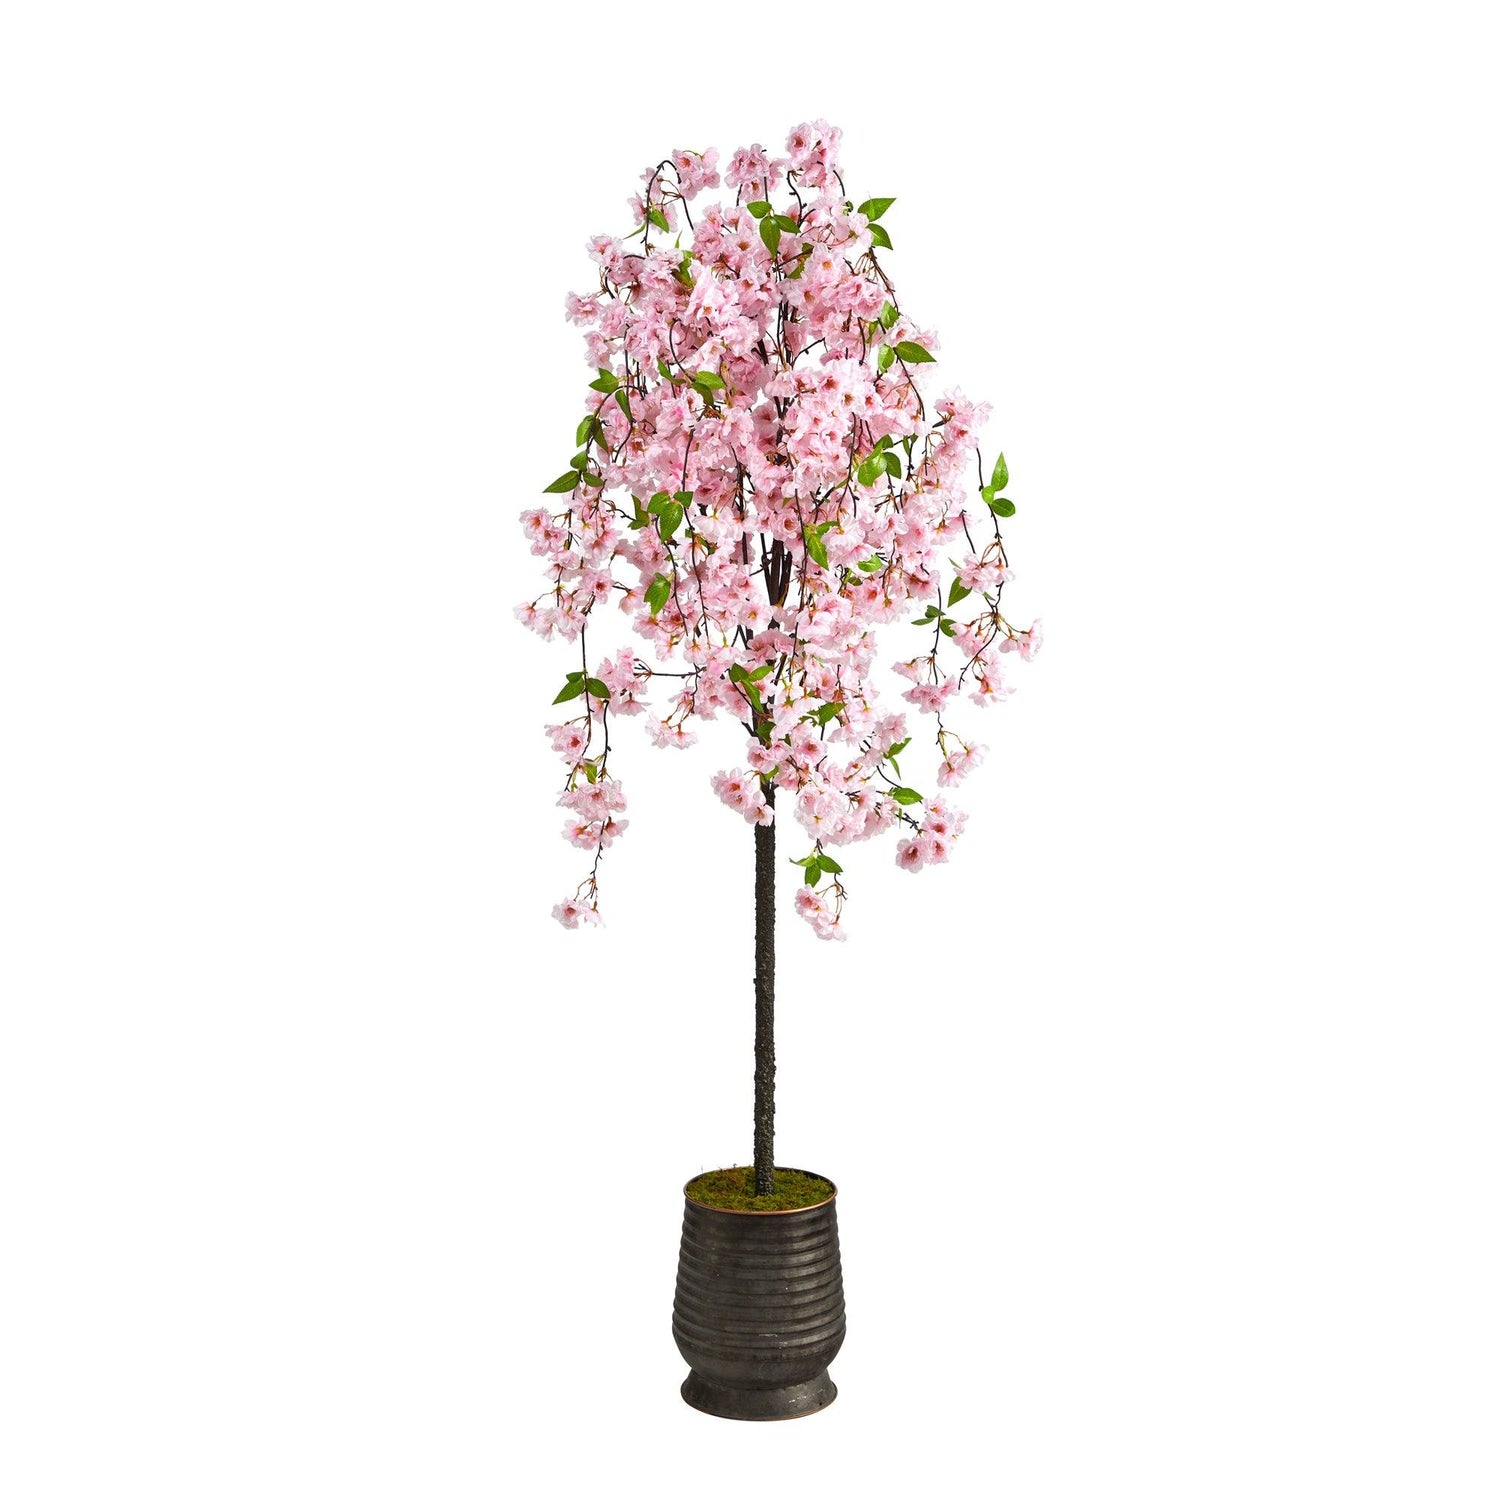 6' Cherry Blossom Artificial Tree in Ribbed Metal Planter